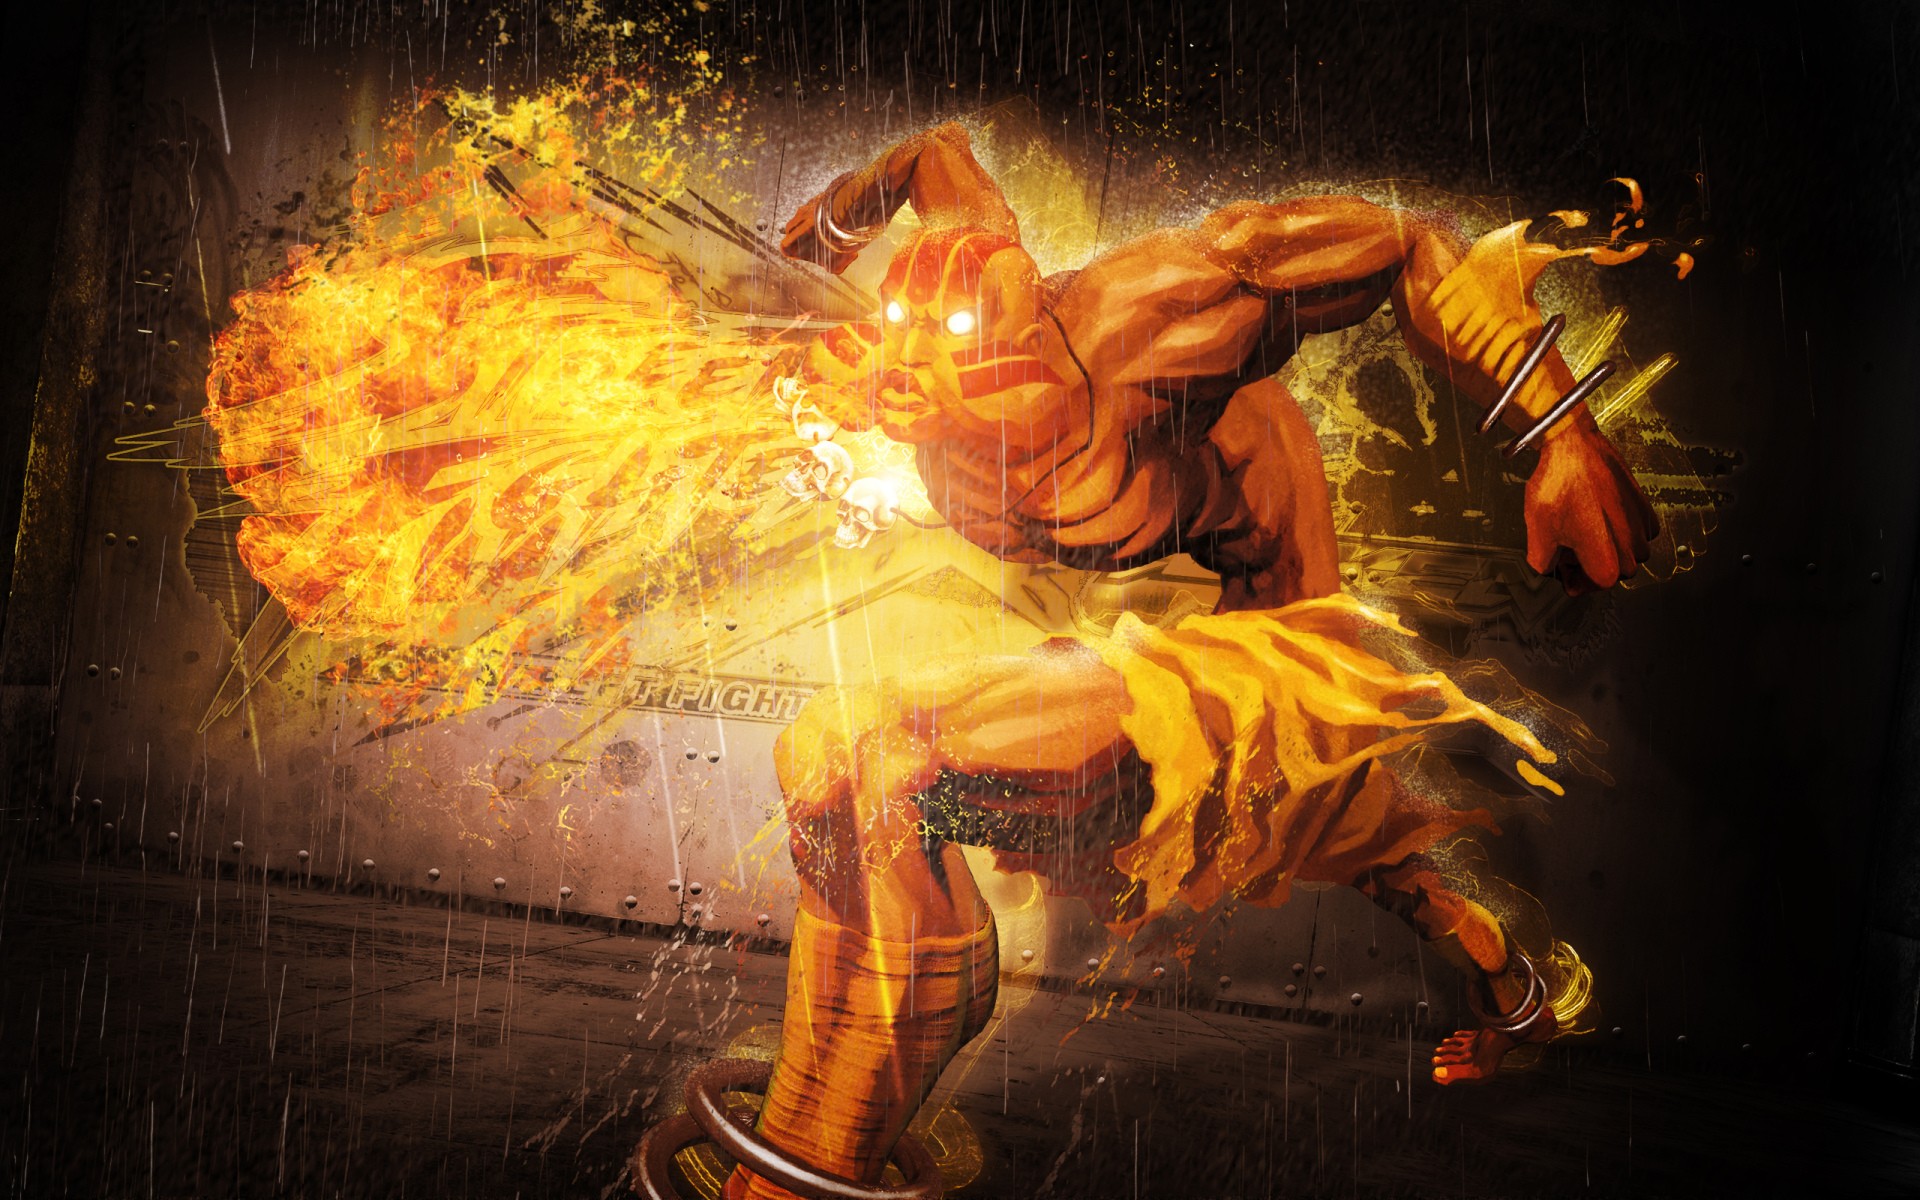 Street Fighter Video Games Dhalsim Fire Yellow Warrior Video Game Art Yoga Pose 1920x1200